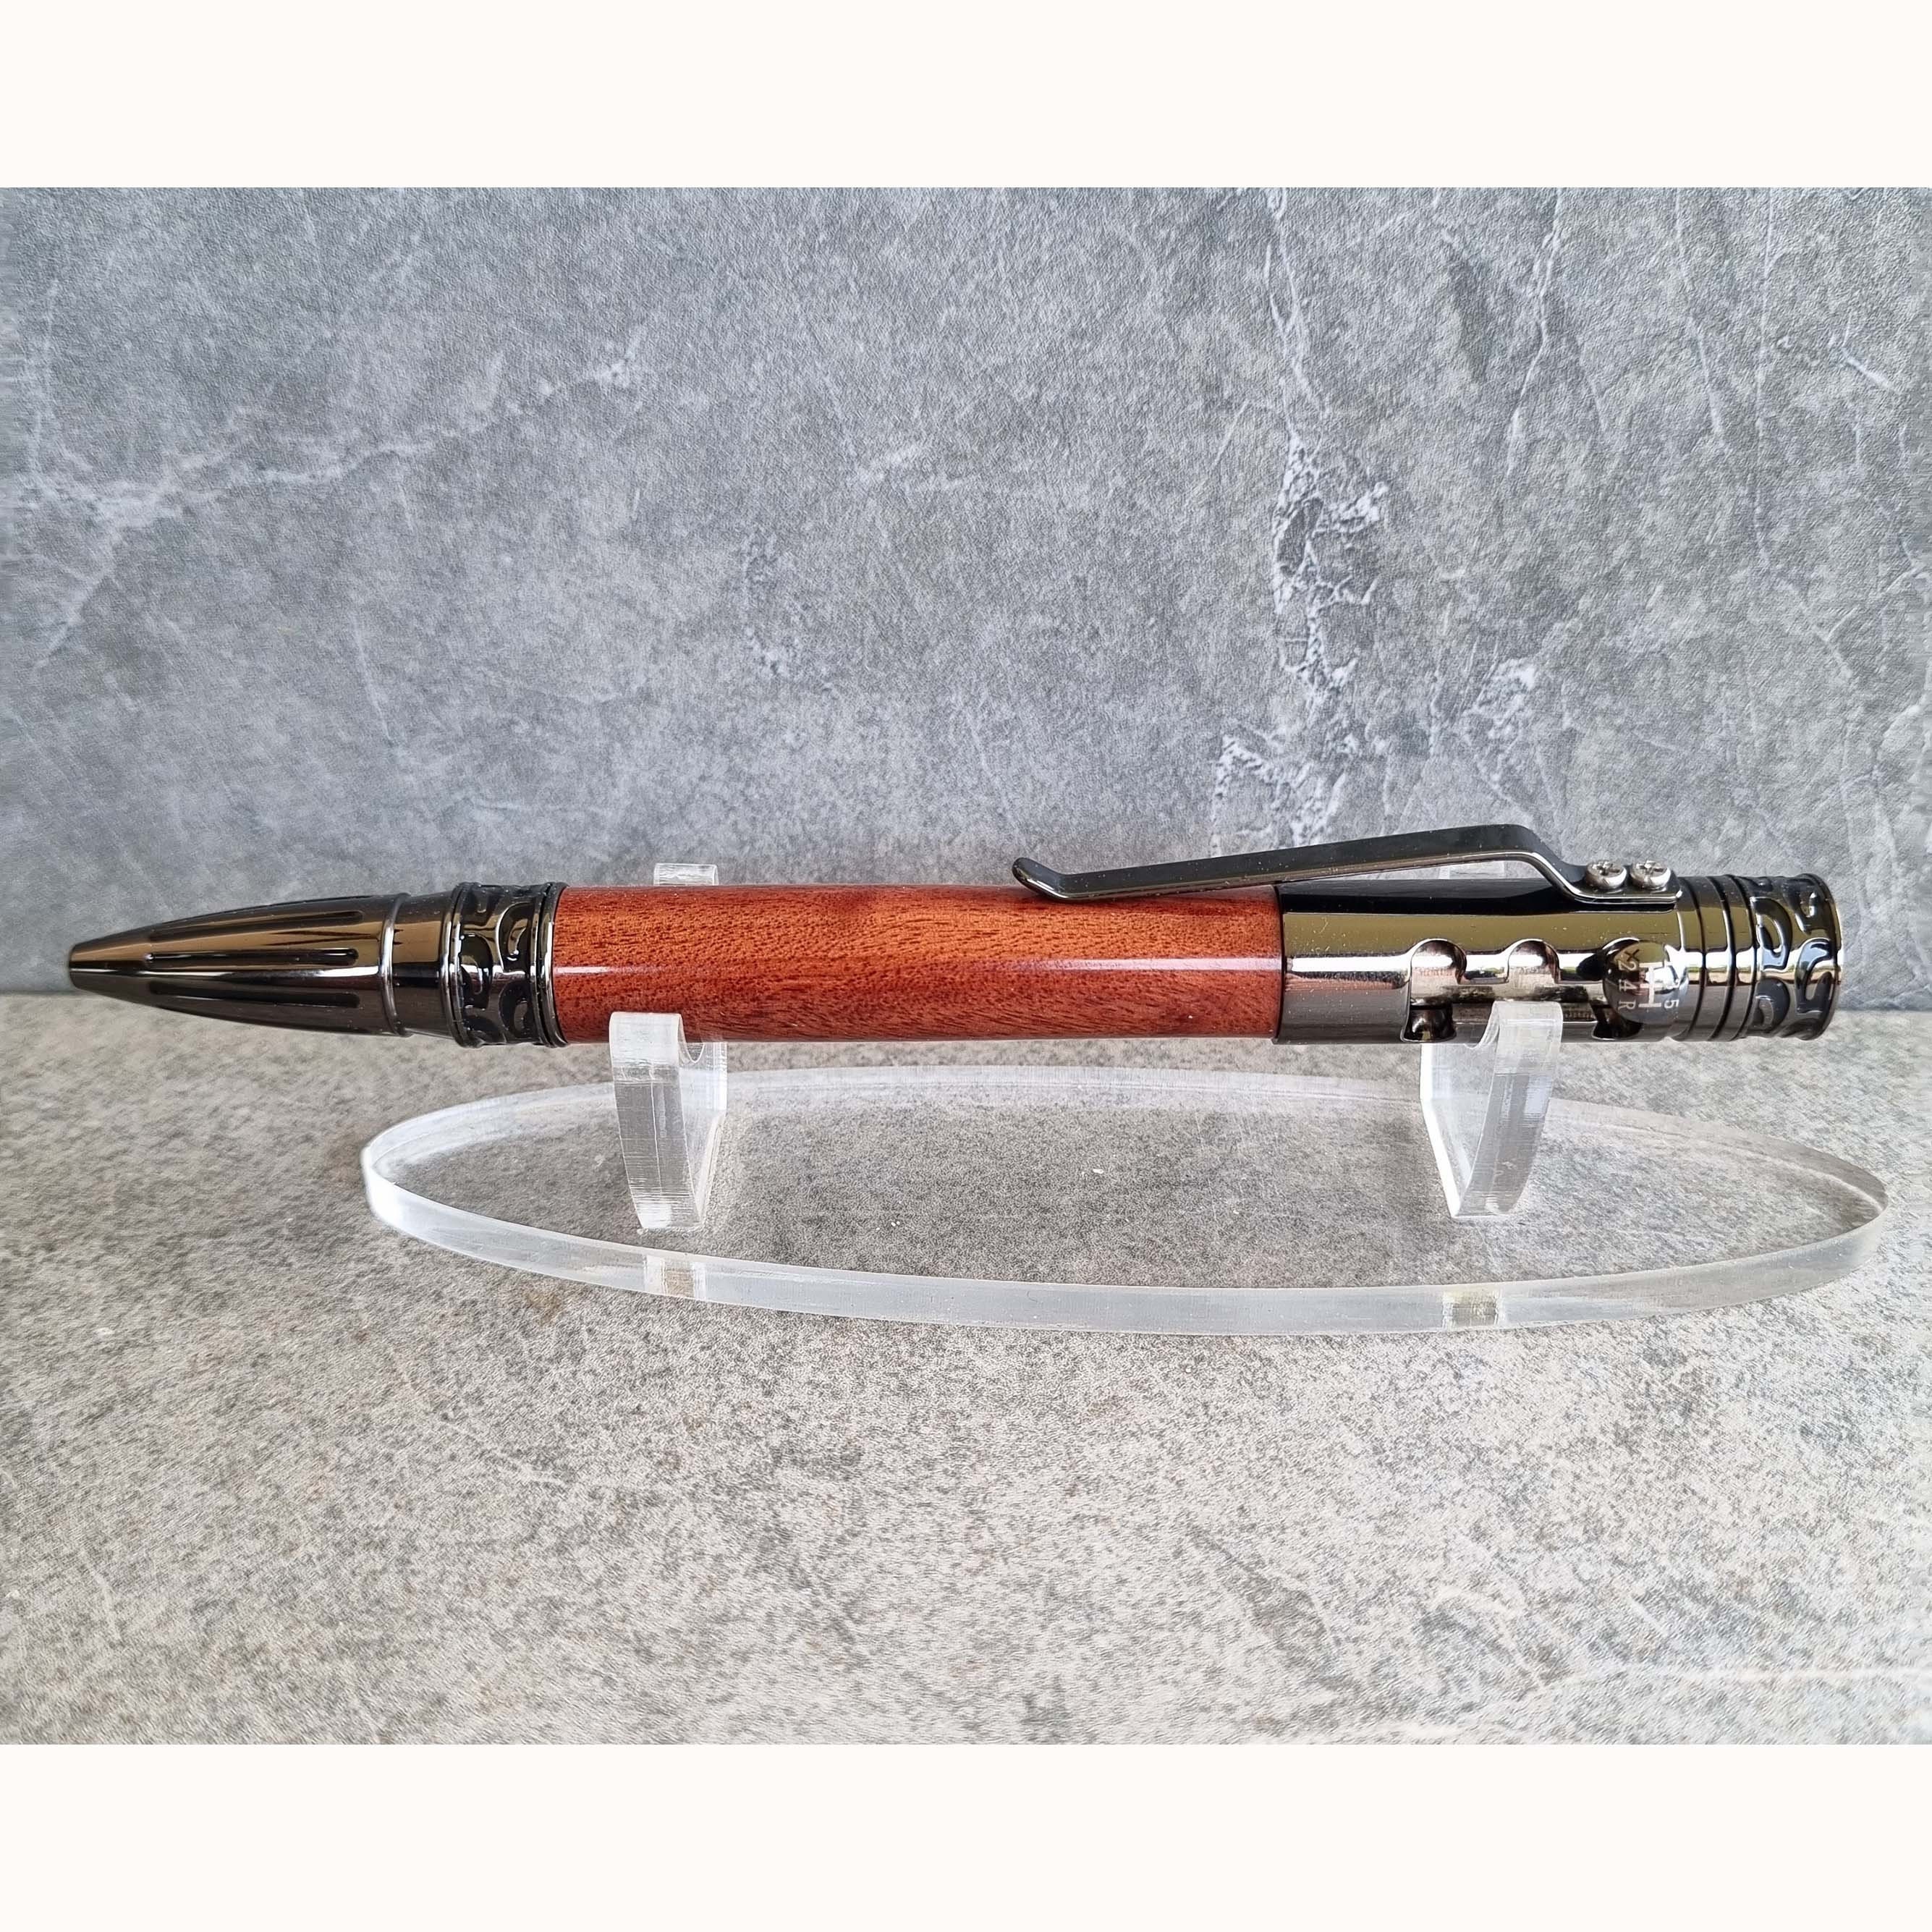 PKM-4 Pen Kits for Wood Turning 